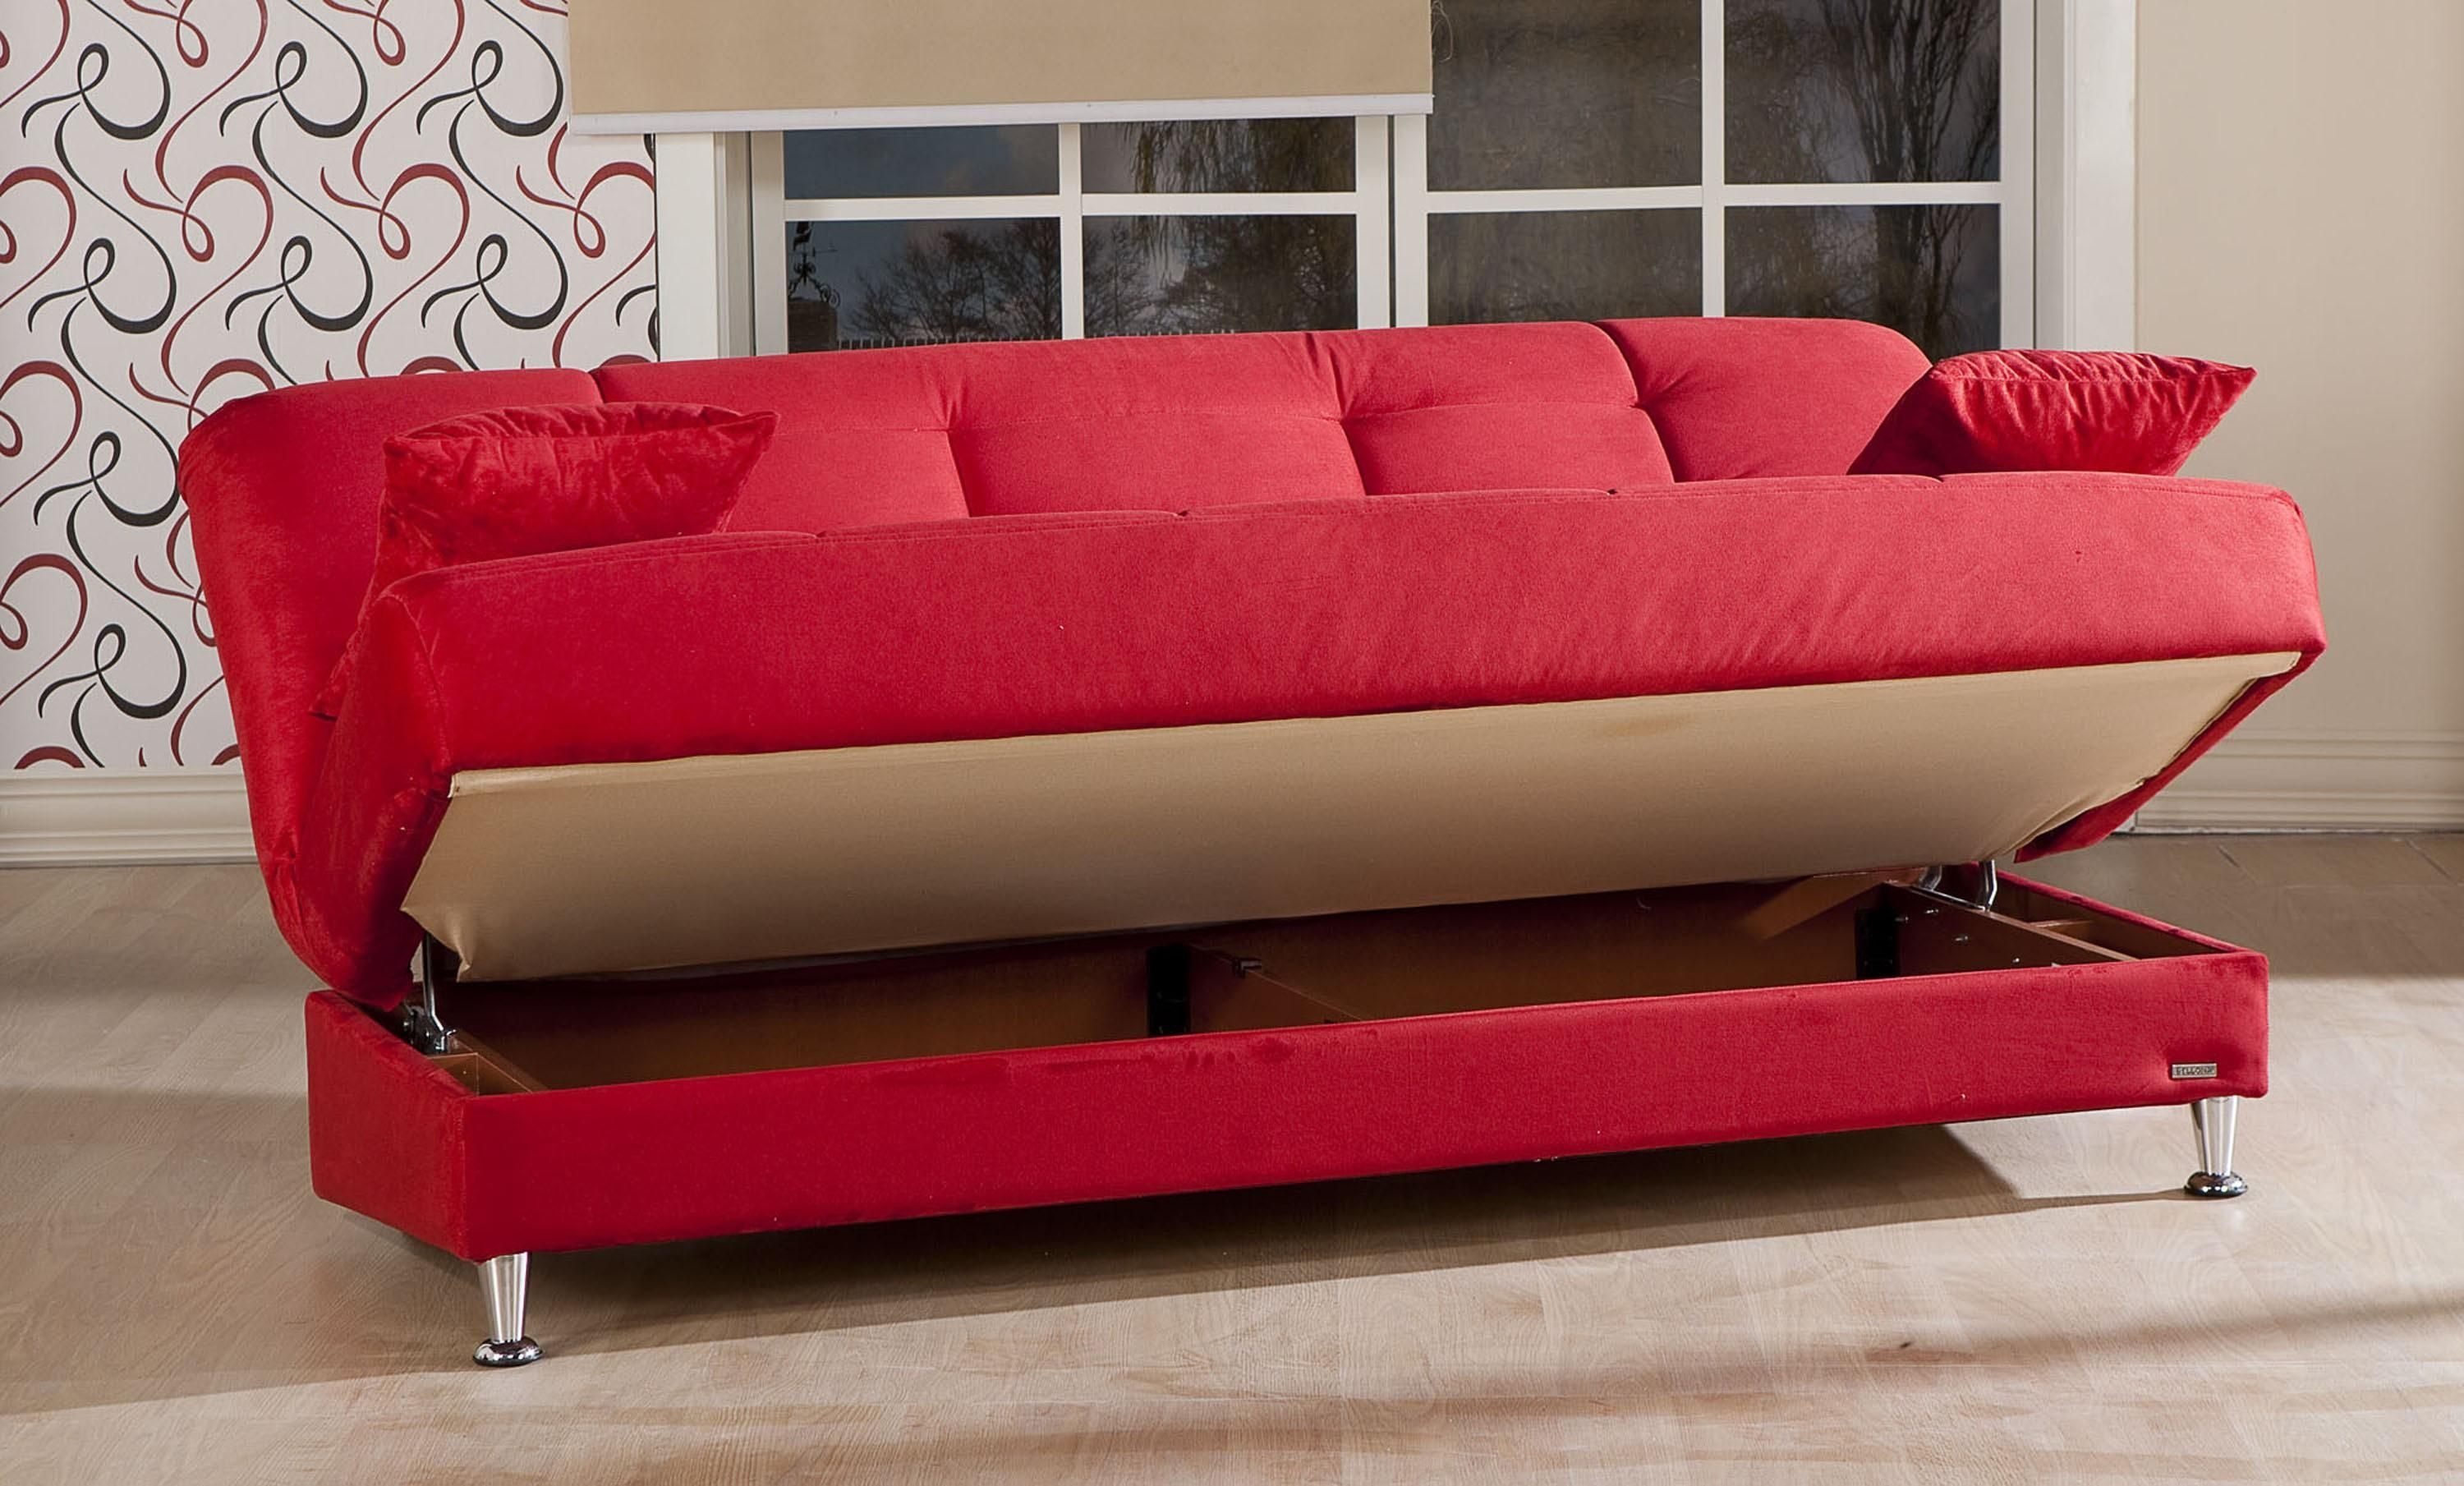 Vegas Sofa Bed With Storage With Regard To Storage Sofa Beds (View 9 of 20)